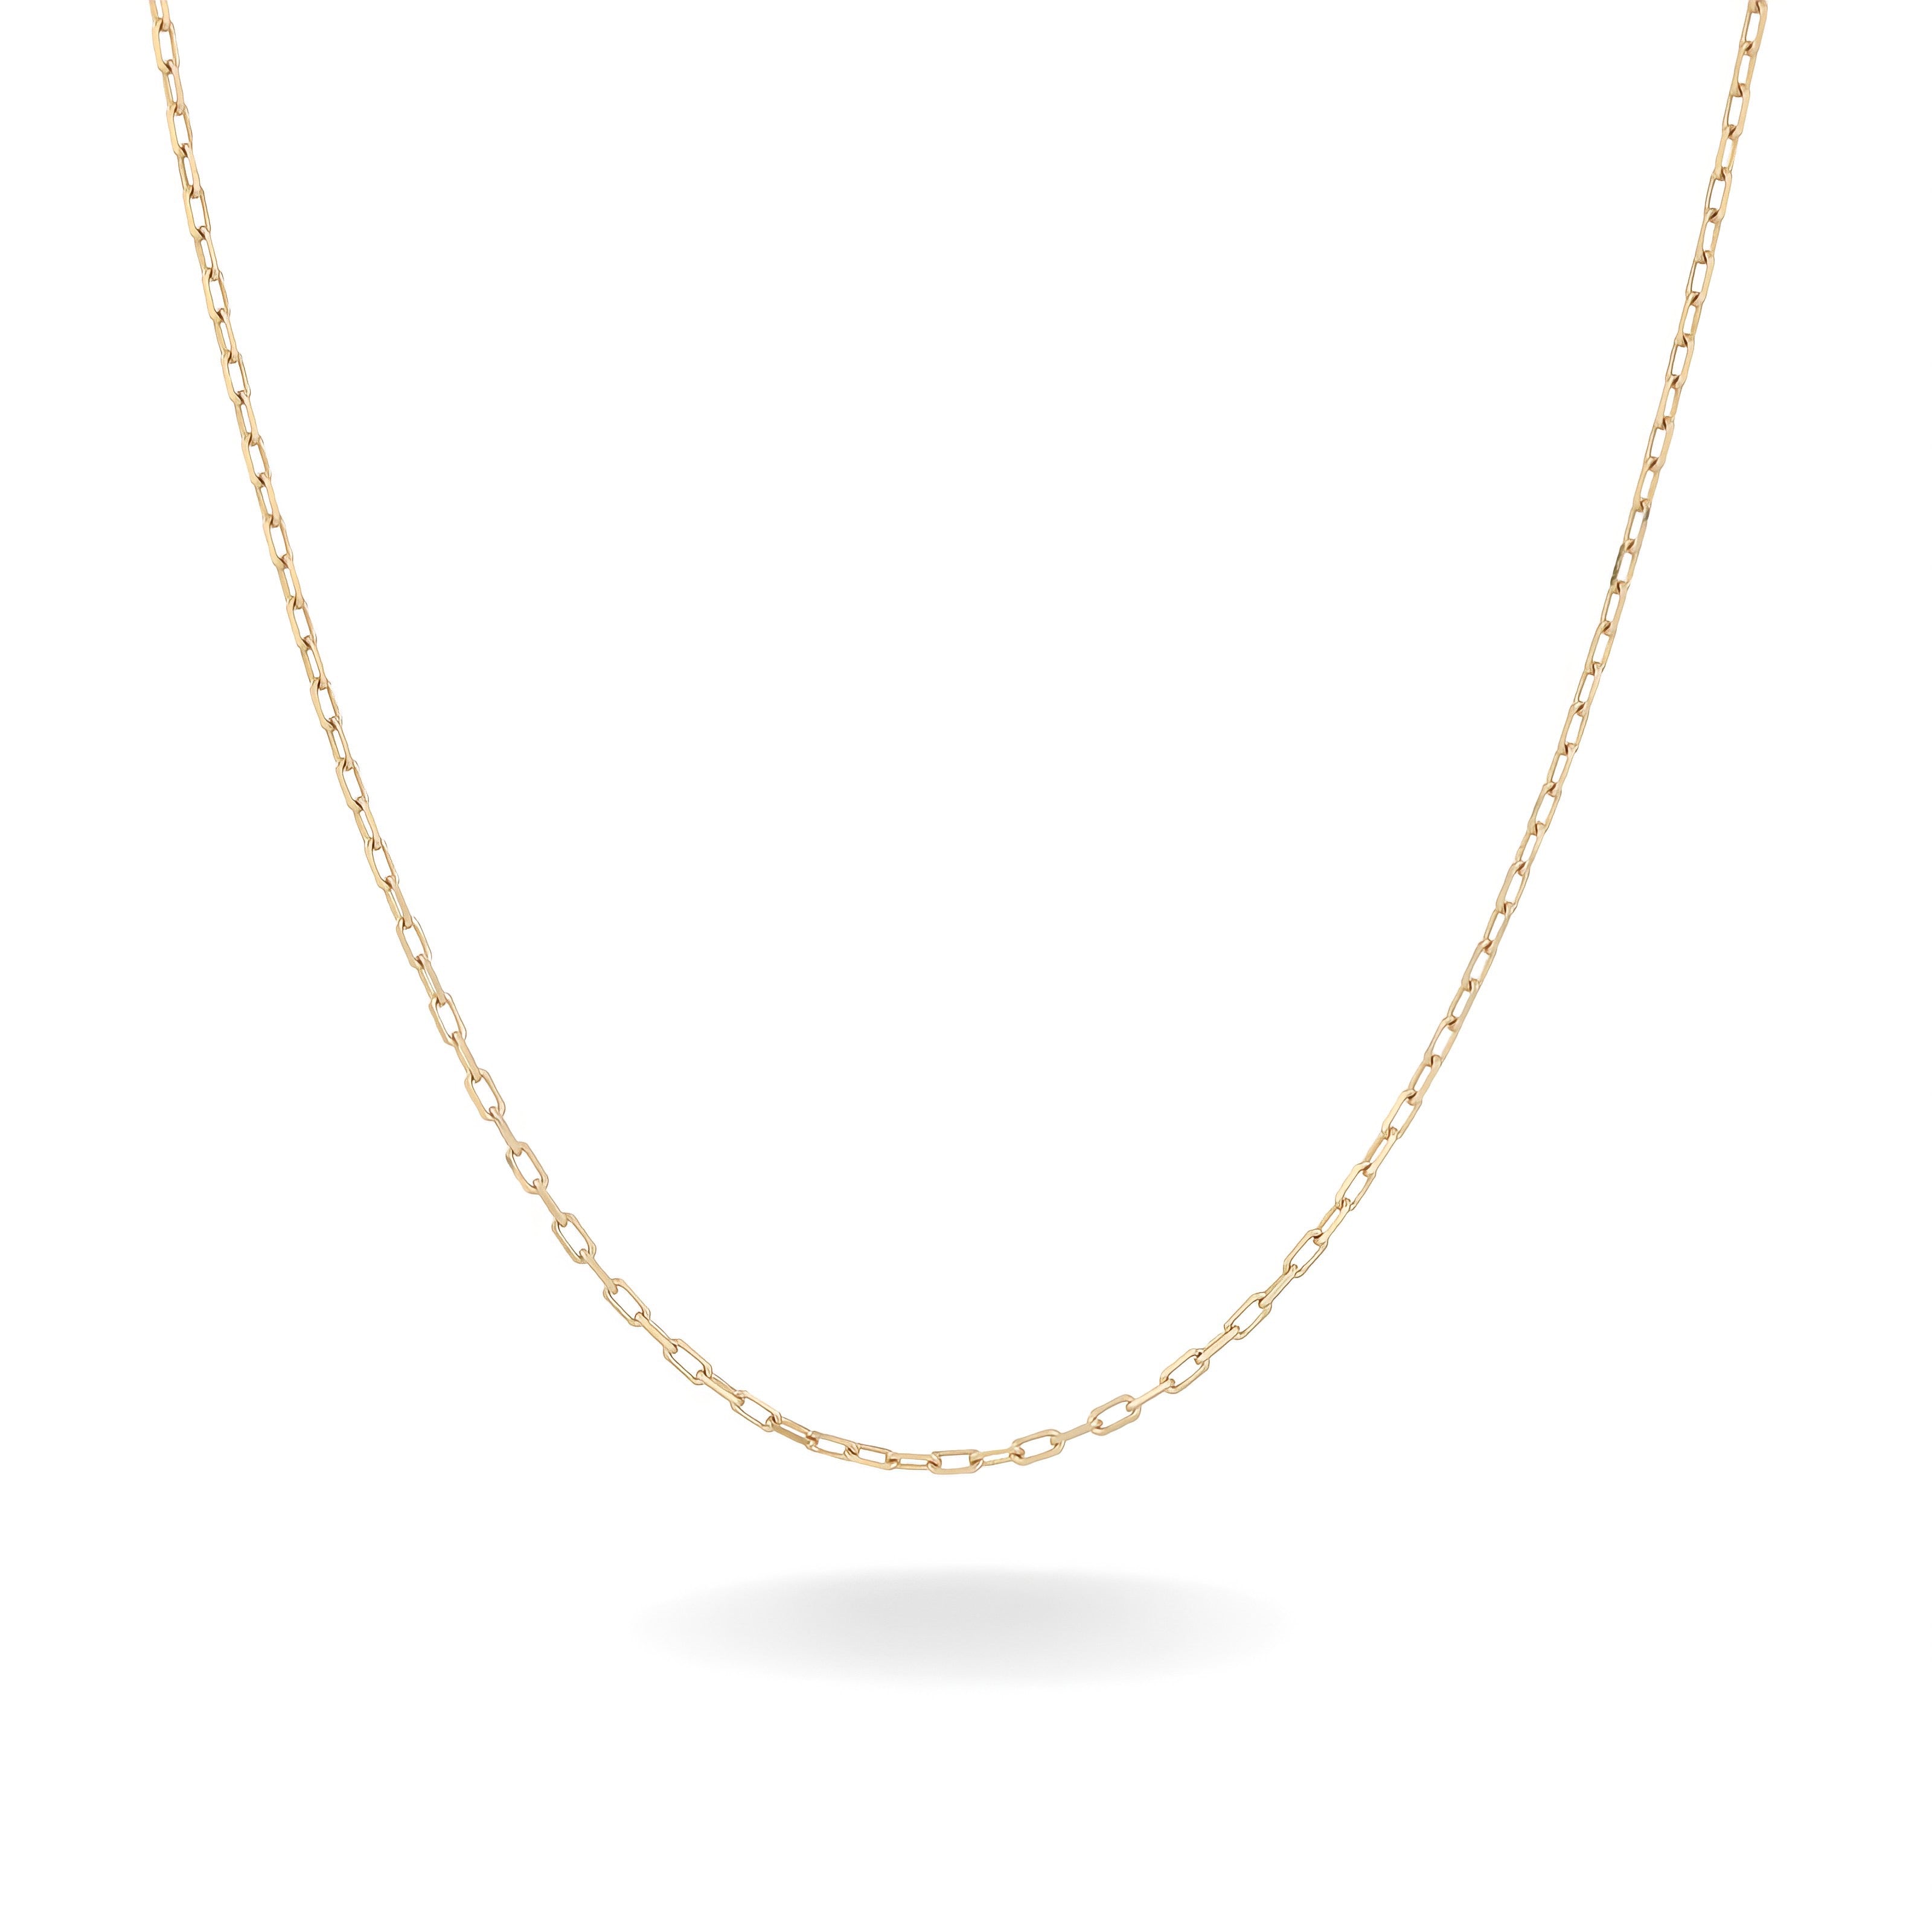 14K YELLOW GOLD PAPERCLIP CHAIN -1MM